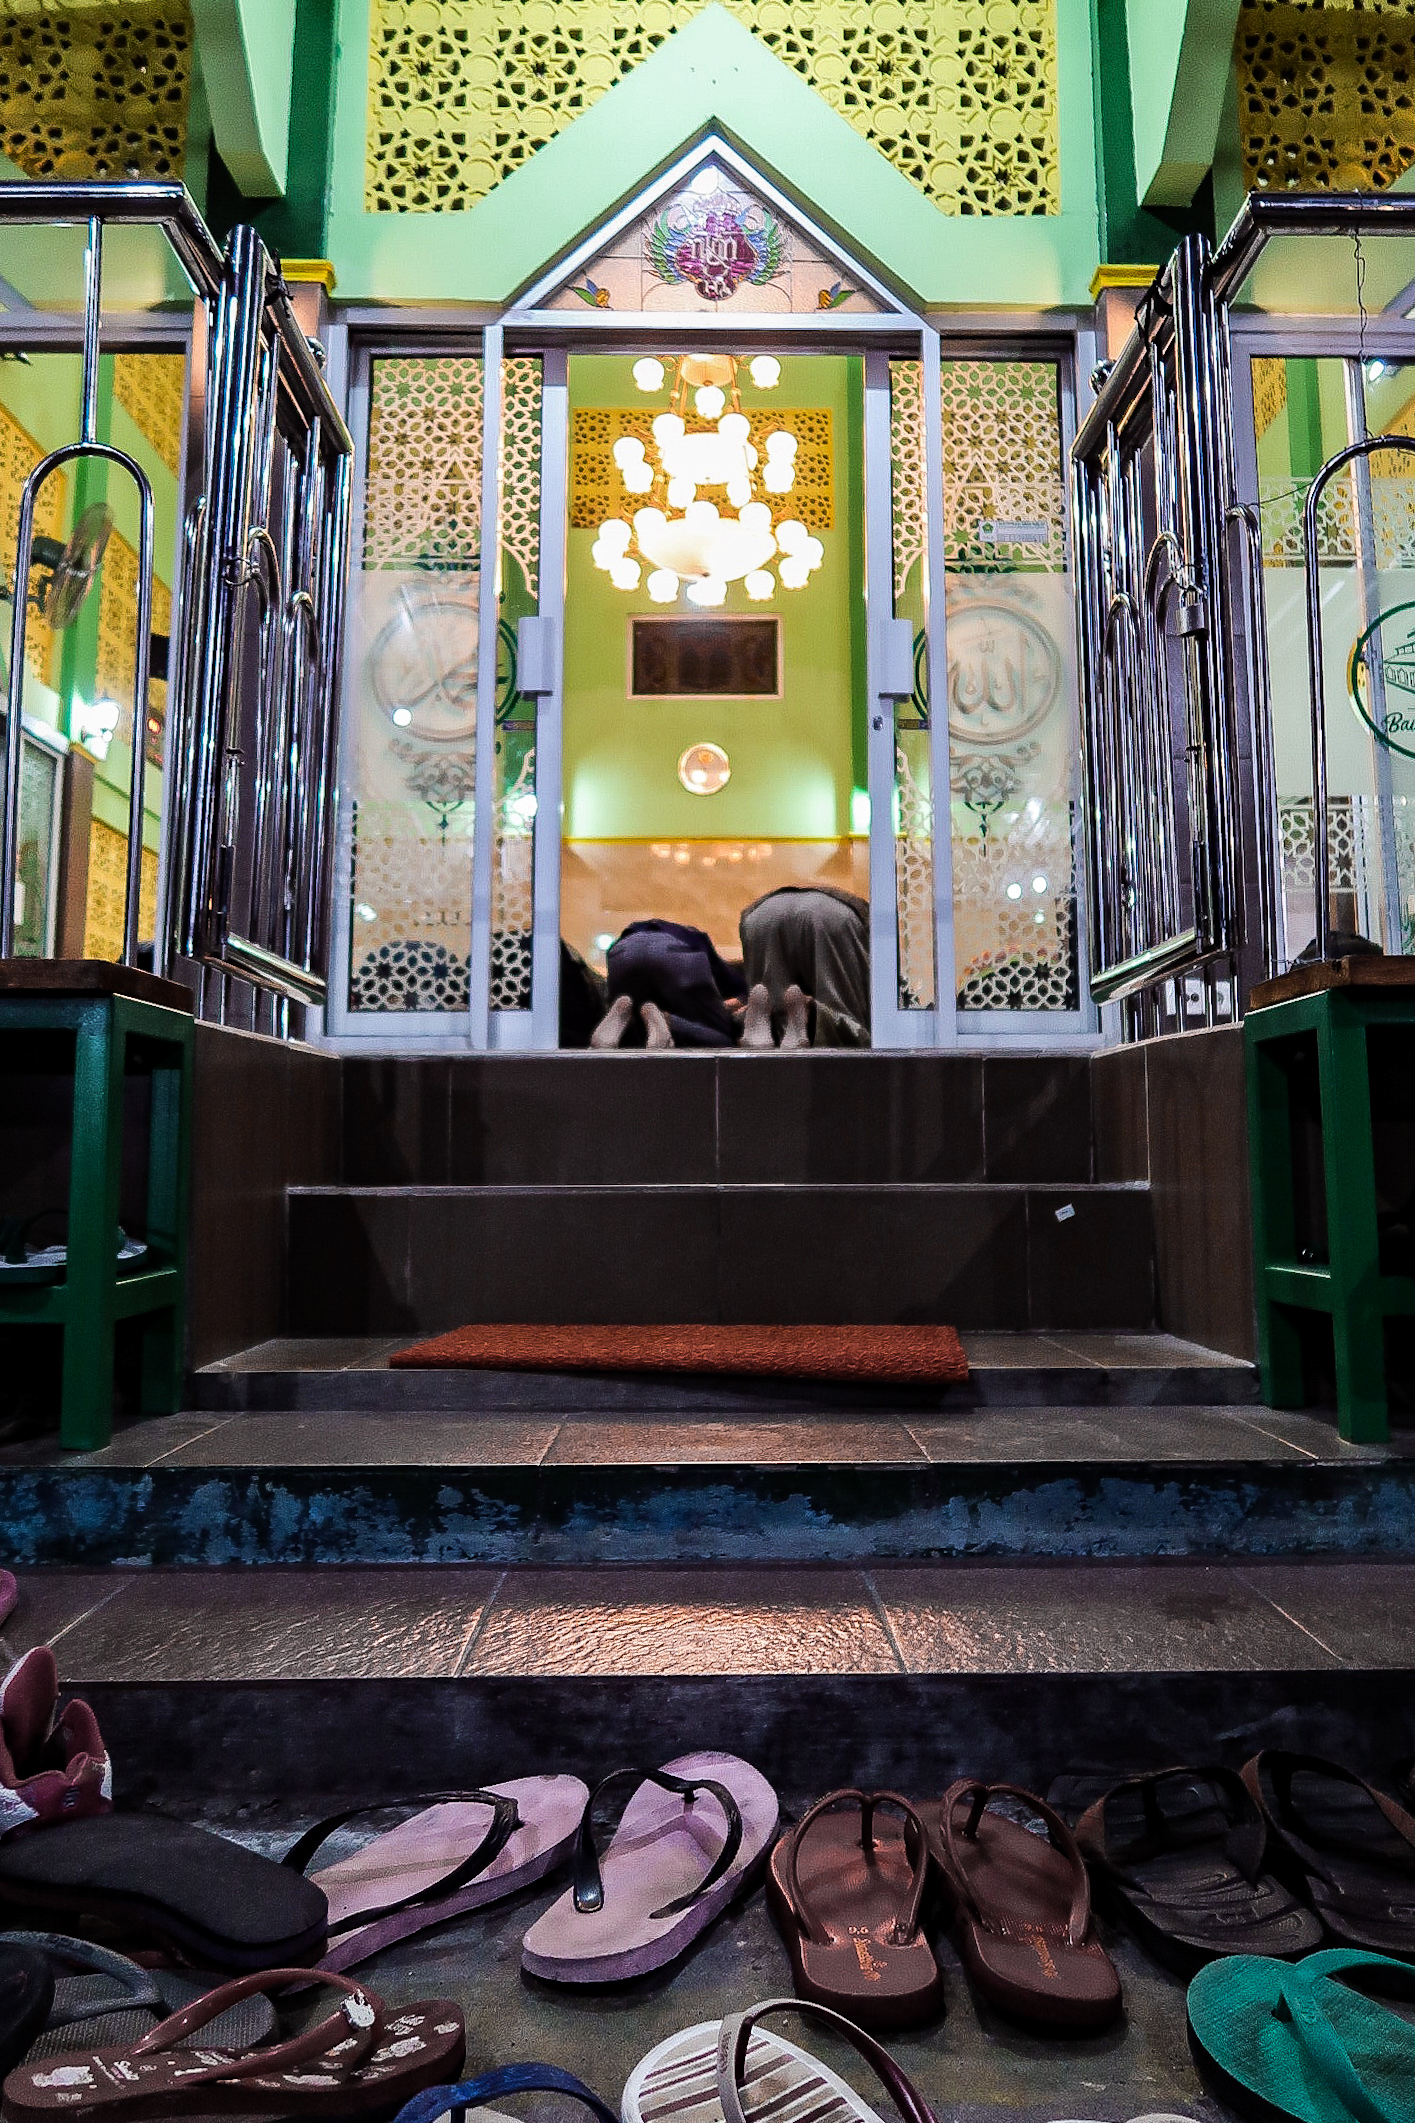 Muslims praying during Ramadan - Indonesia. The geometry dragged me in. The stair work like the headline (connection) from flip flops to the prayers.